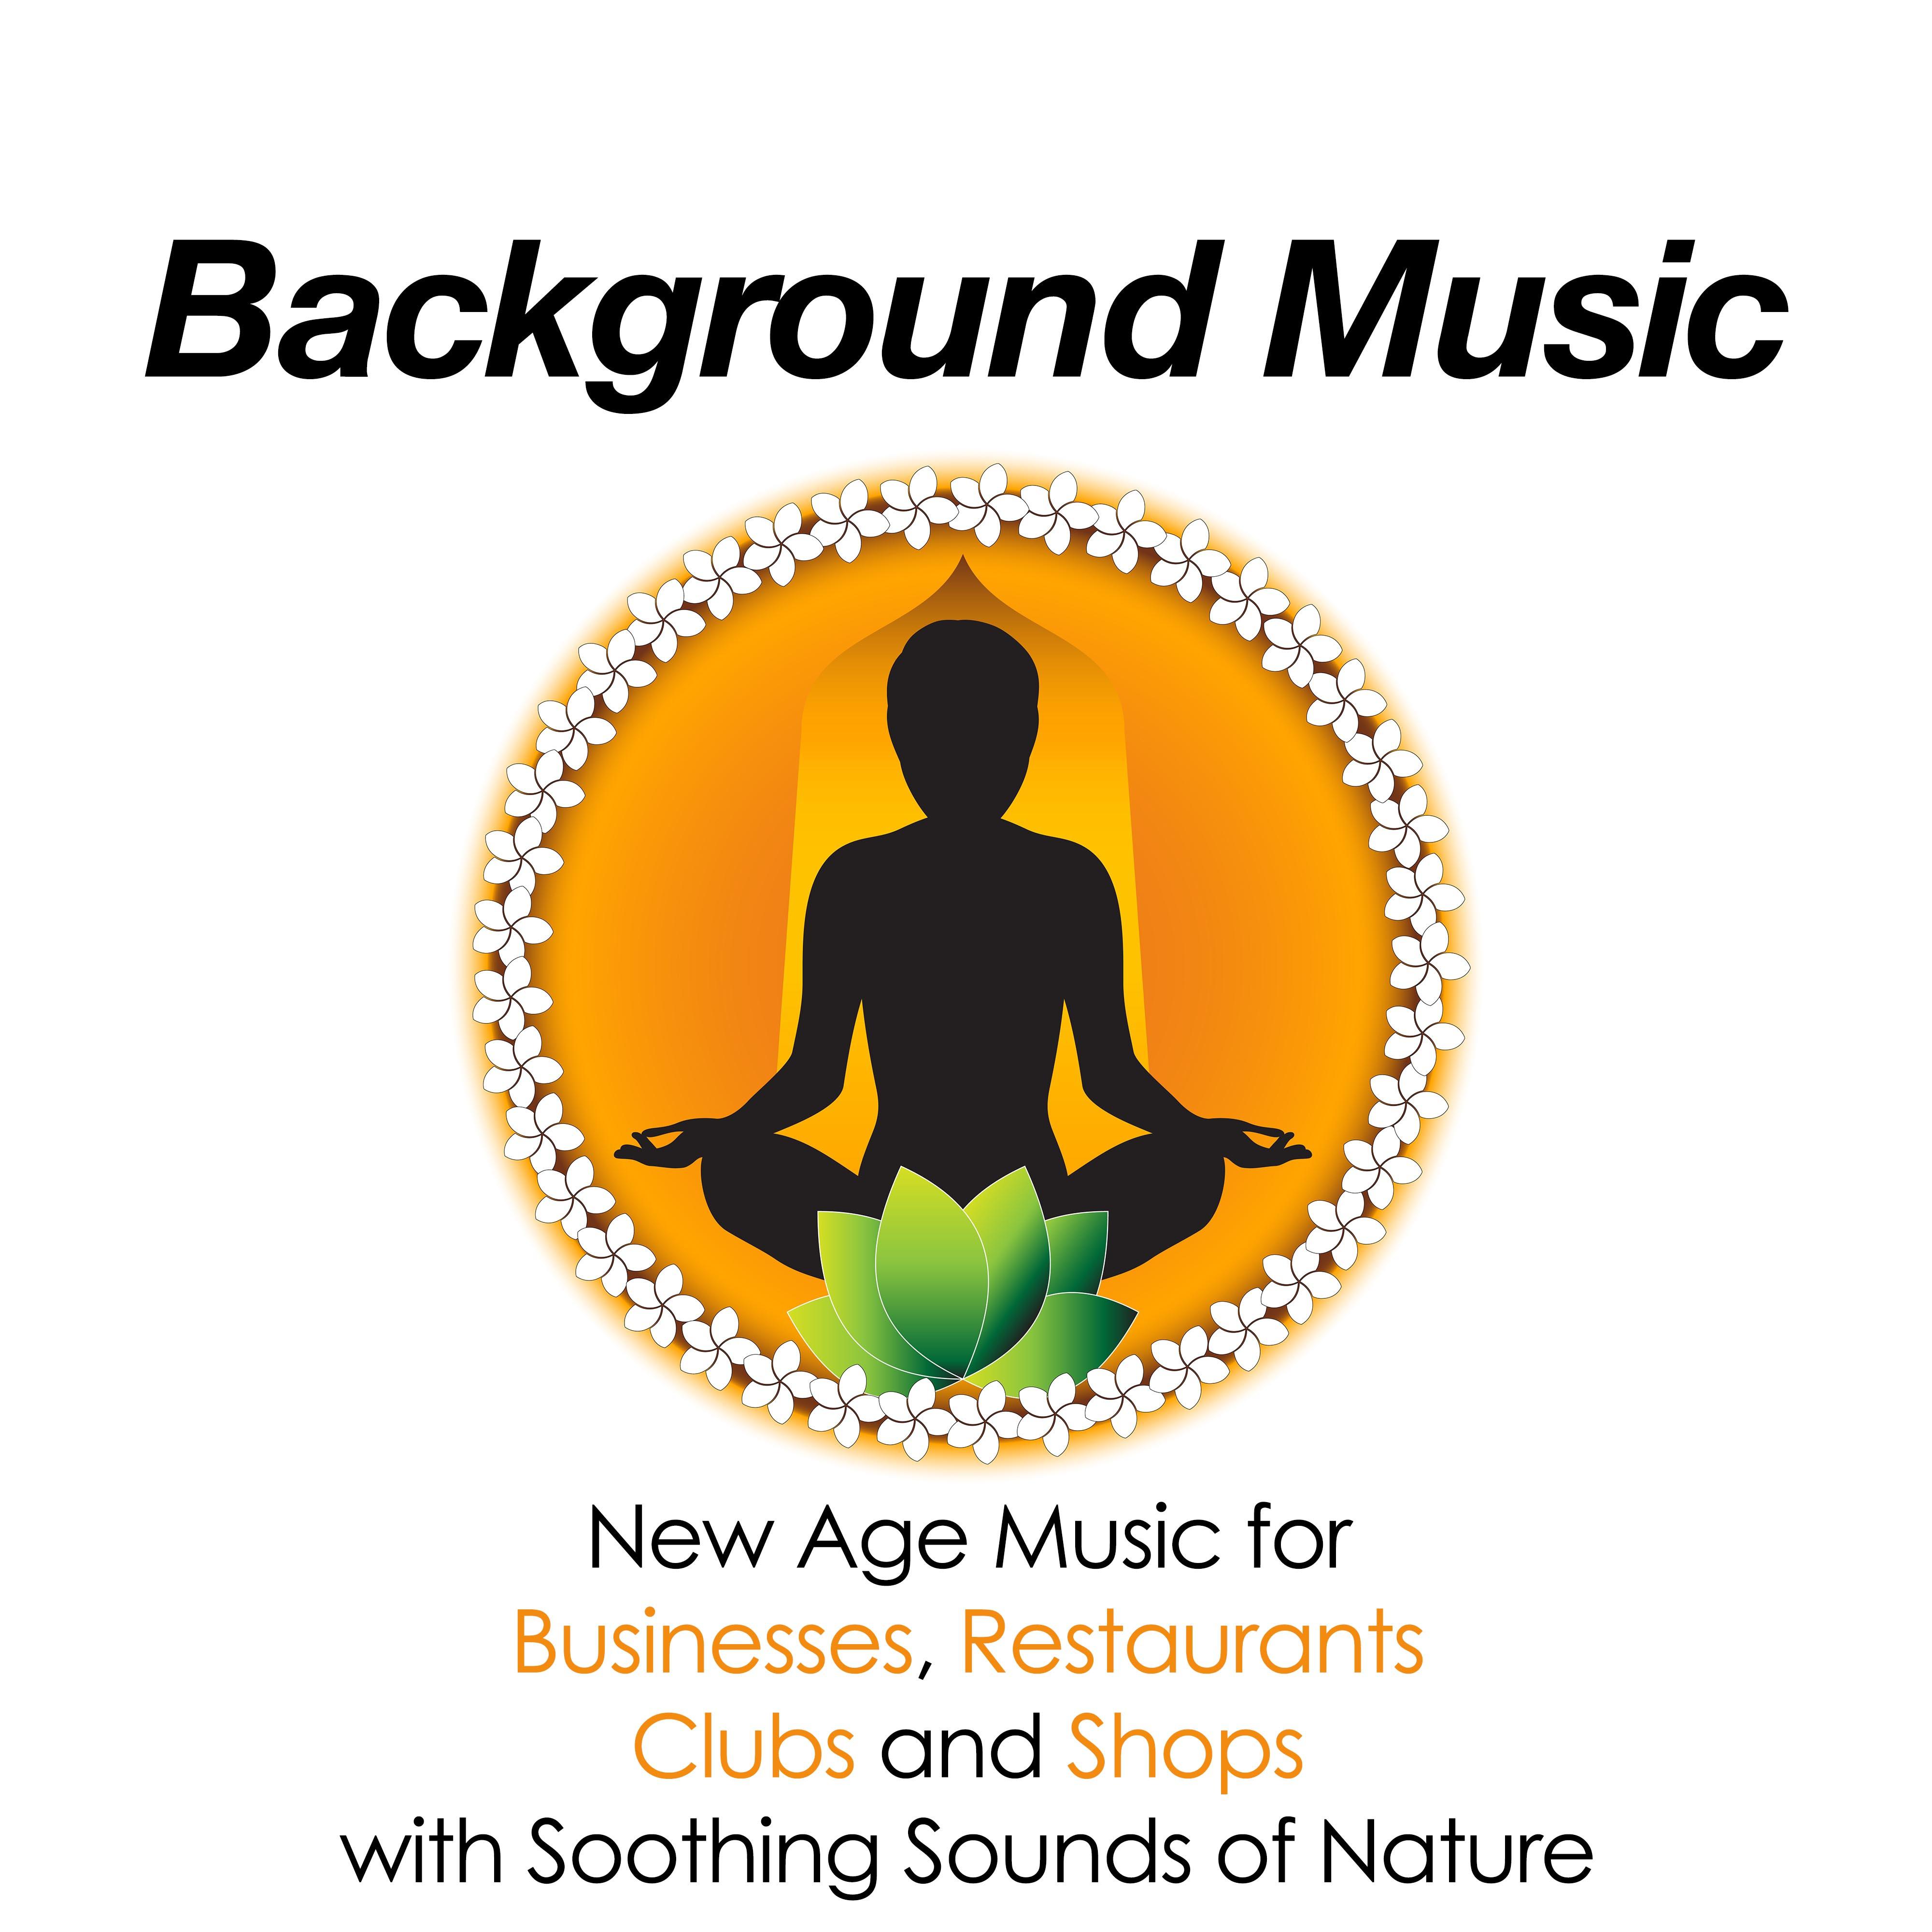 Background Music - The Best Relaxing New Age Music for Businesses, Restaurants, Clubs and Shops with Soothing Sounds of Nature